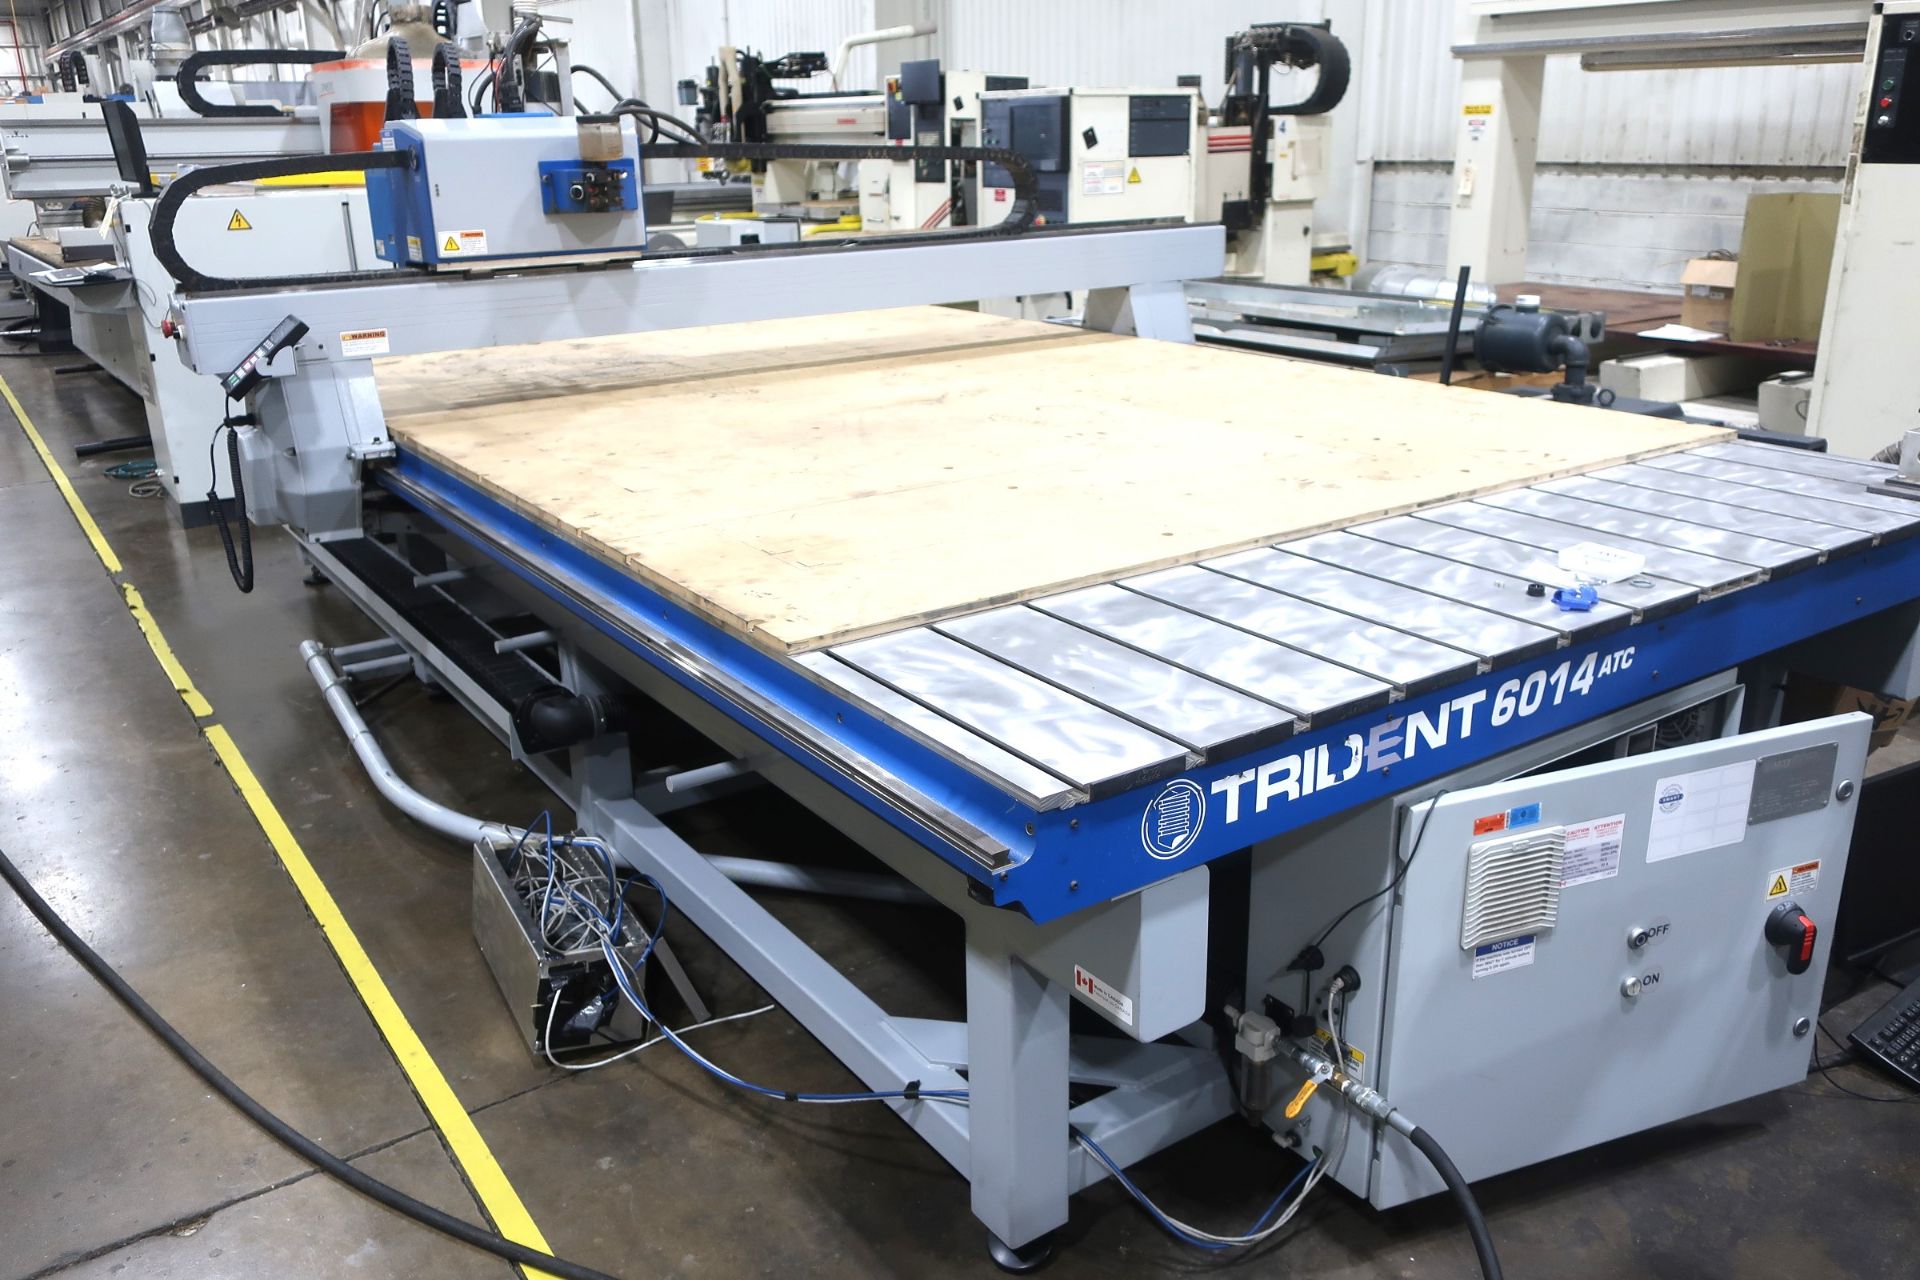 7'x14' AXYZ TRIDENT 6014 ATC CNC ROUTER AND KNIFE CUTTING MACHINE, S/N 6250-6140, NEW 2017 - Image 12 of 19